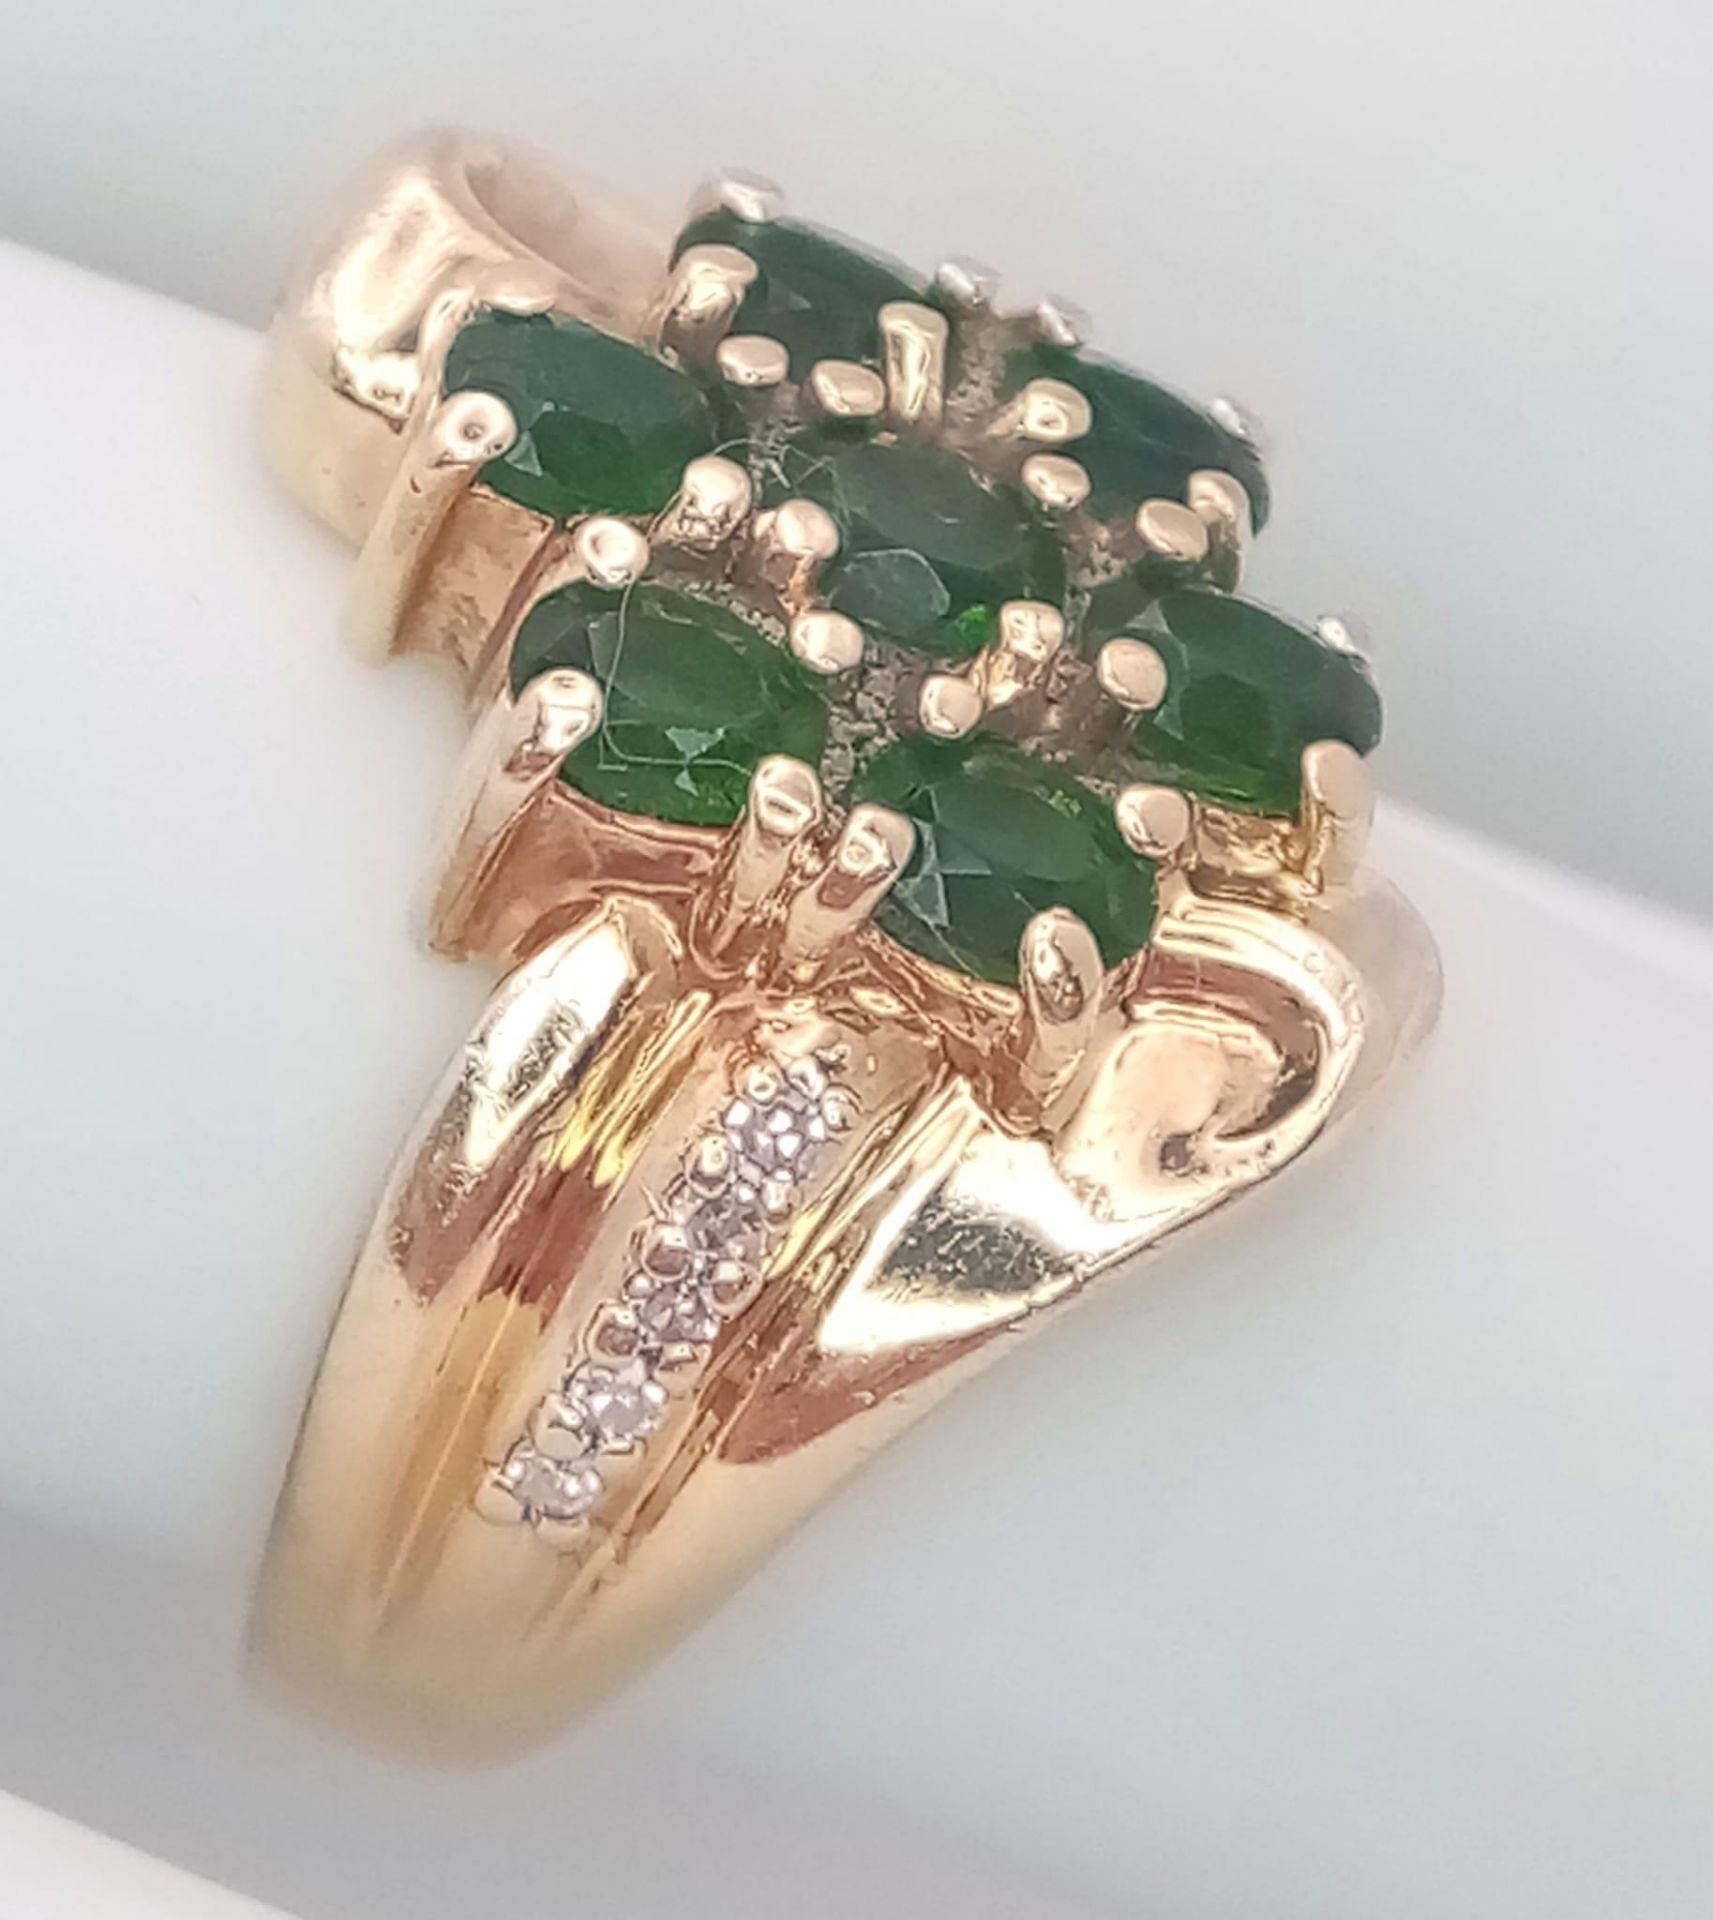 A 14K Yellow Gold, Diamond and Green Stone Ring. Size M, 6.5g total weight. Ref: SC 7073 - Image 8 of 11